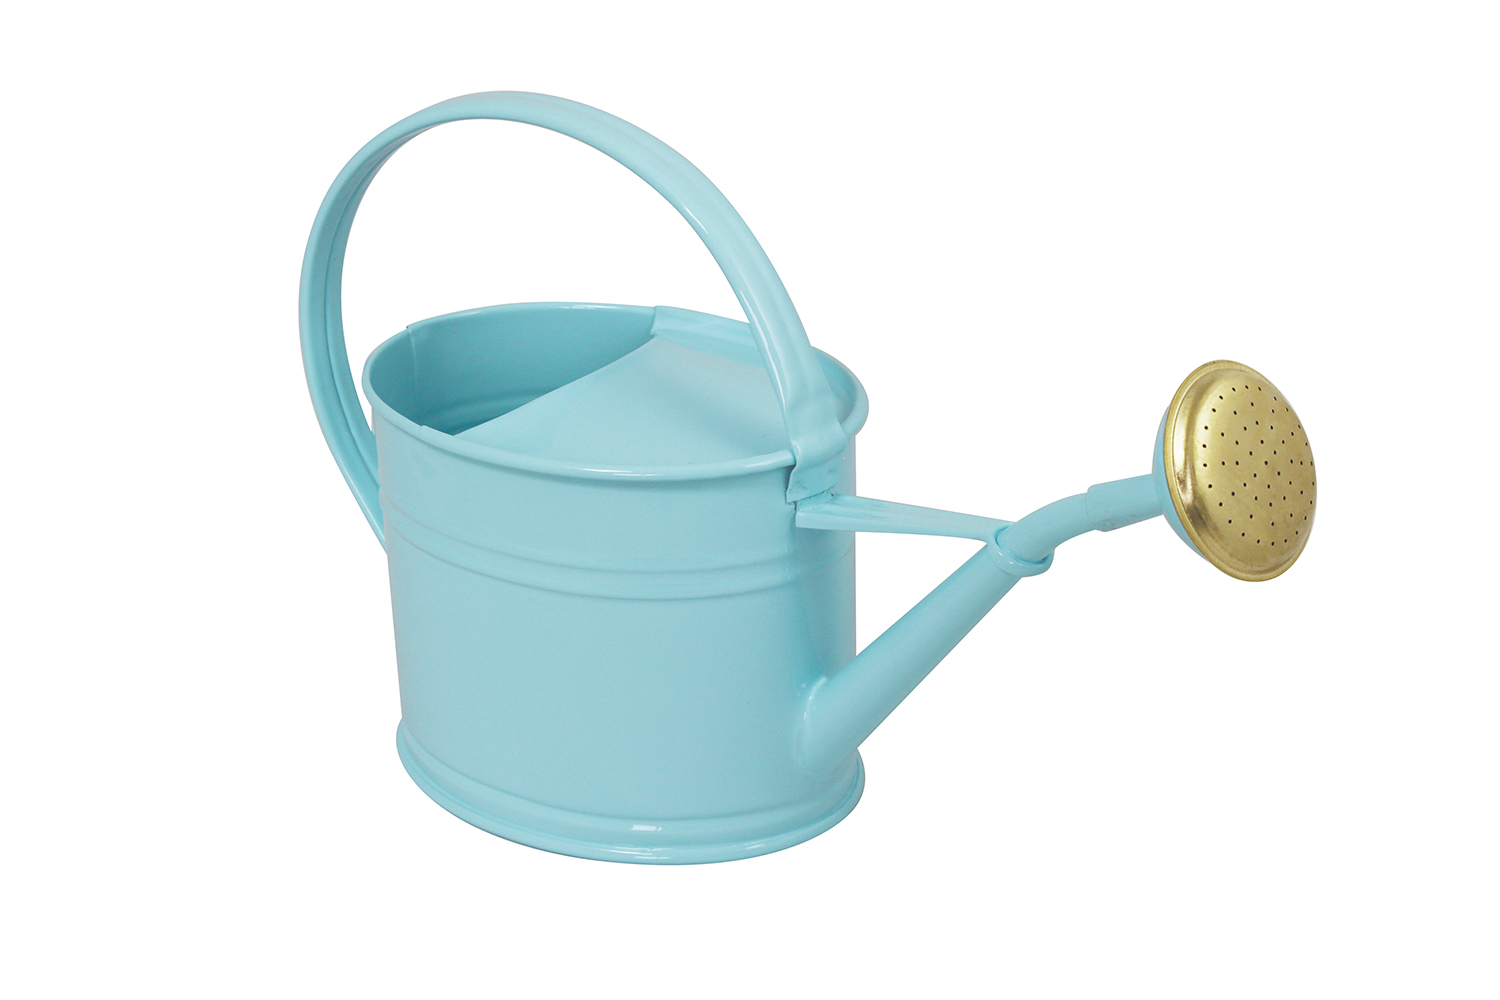 Steel watering cans galvanized by a volume of 1.75L Pastel blue